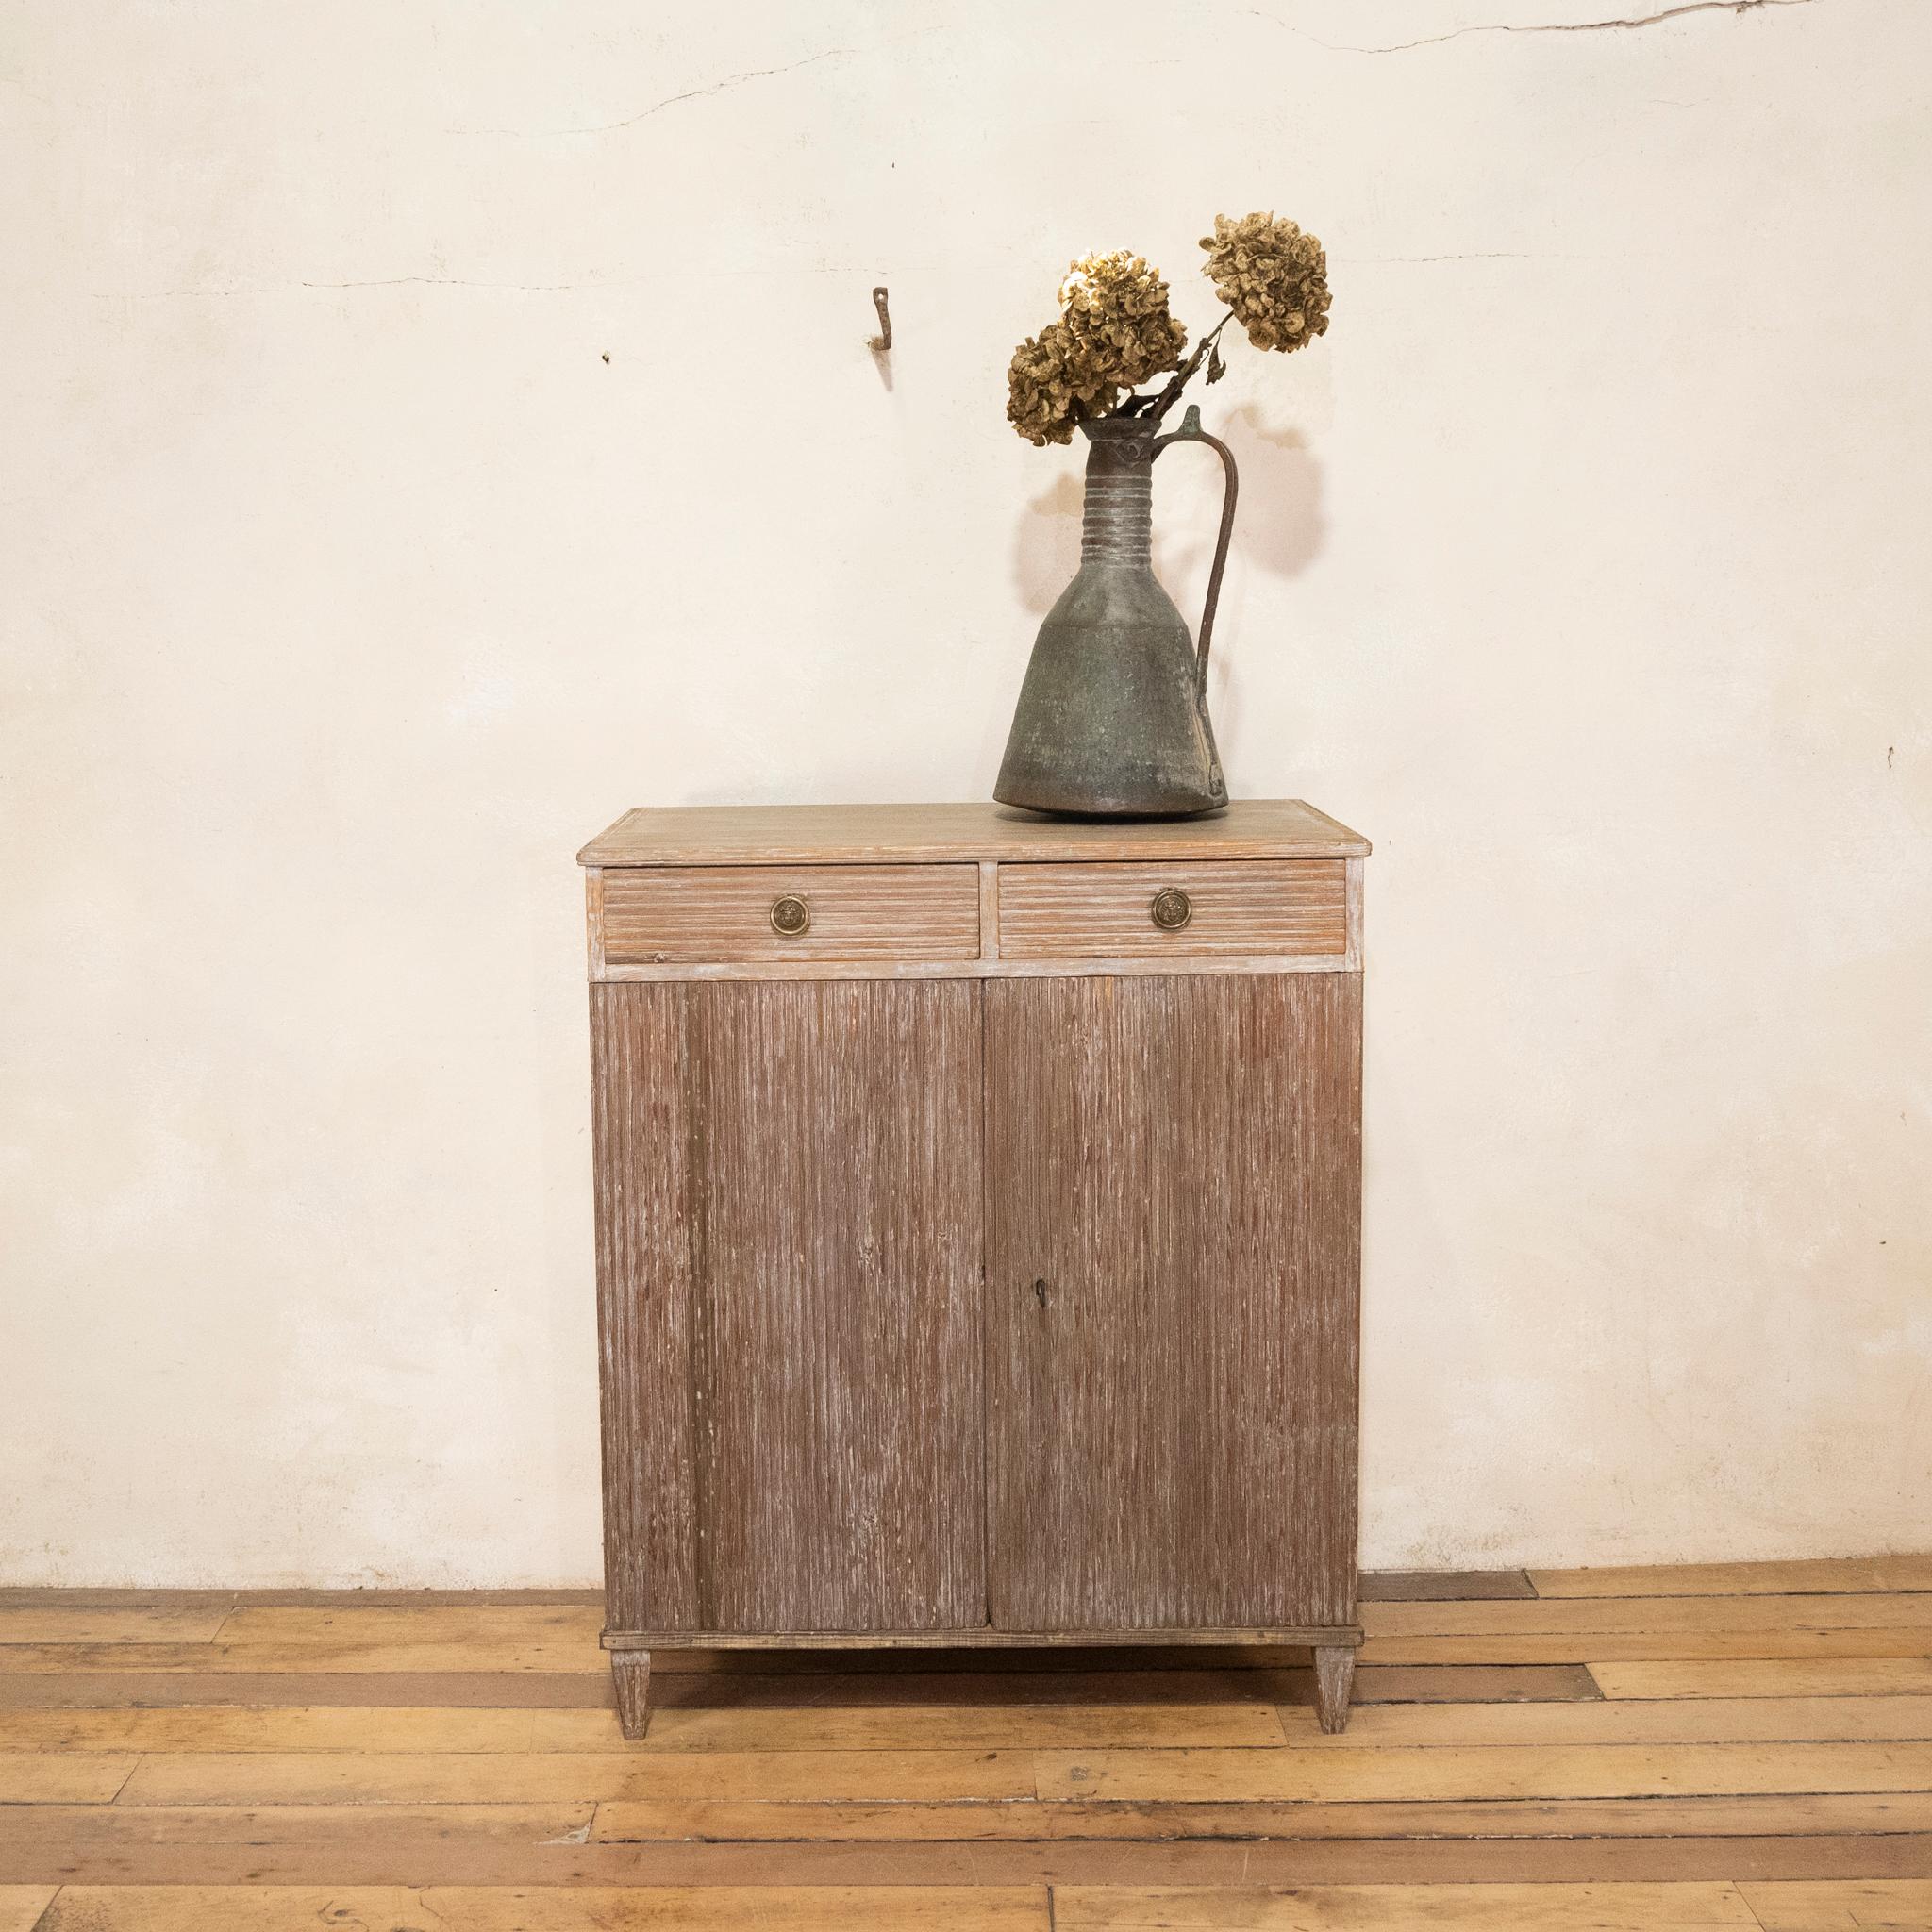 A striking late 18th-century Swedish dry scraped sideboard cabinet.
Displaying a wonderful old Patina presenting a mixture of colours displaying tones of white & natural wood. Displaying a pair of drawers above a pair of carved reeded decorations